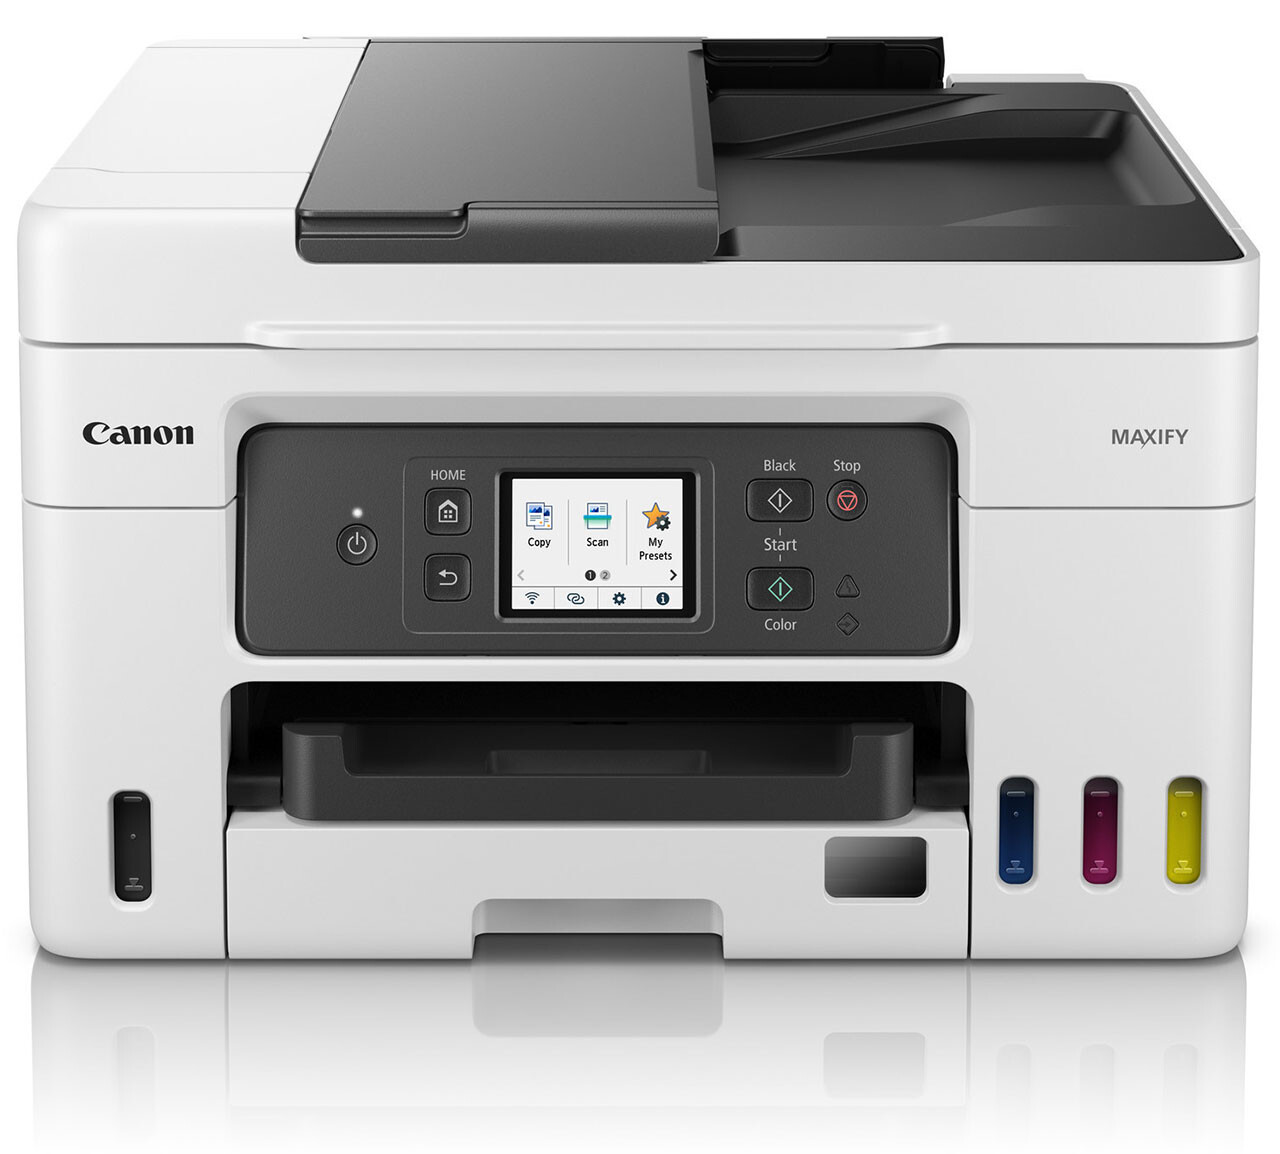 (PR) Canon Expands Business Inkjet and Laser Printer Portfolio with Four New Printers to Help Provide Harmony at Work